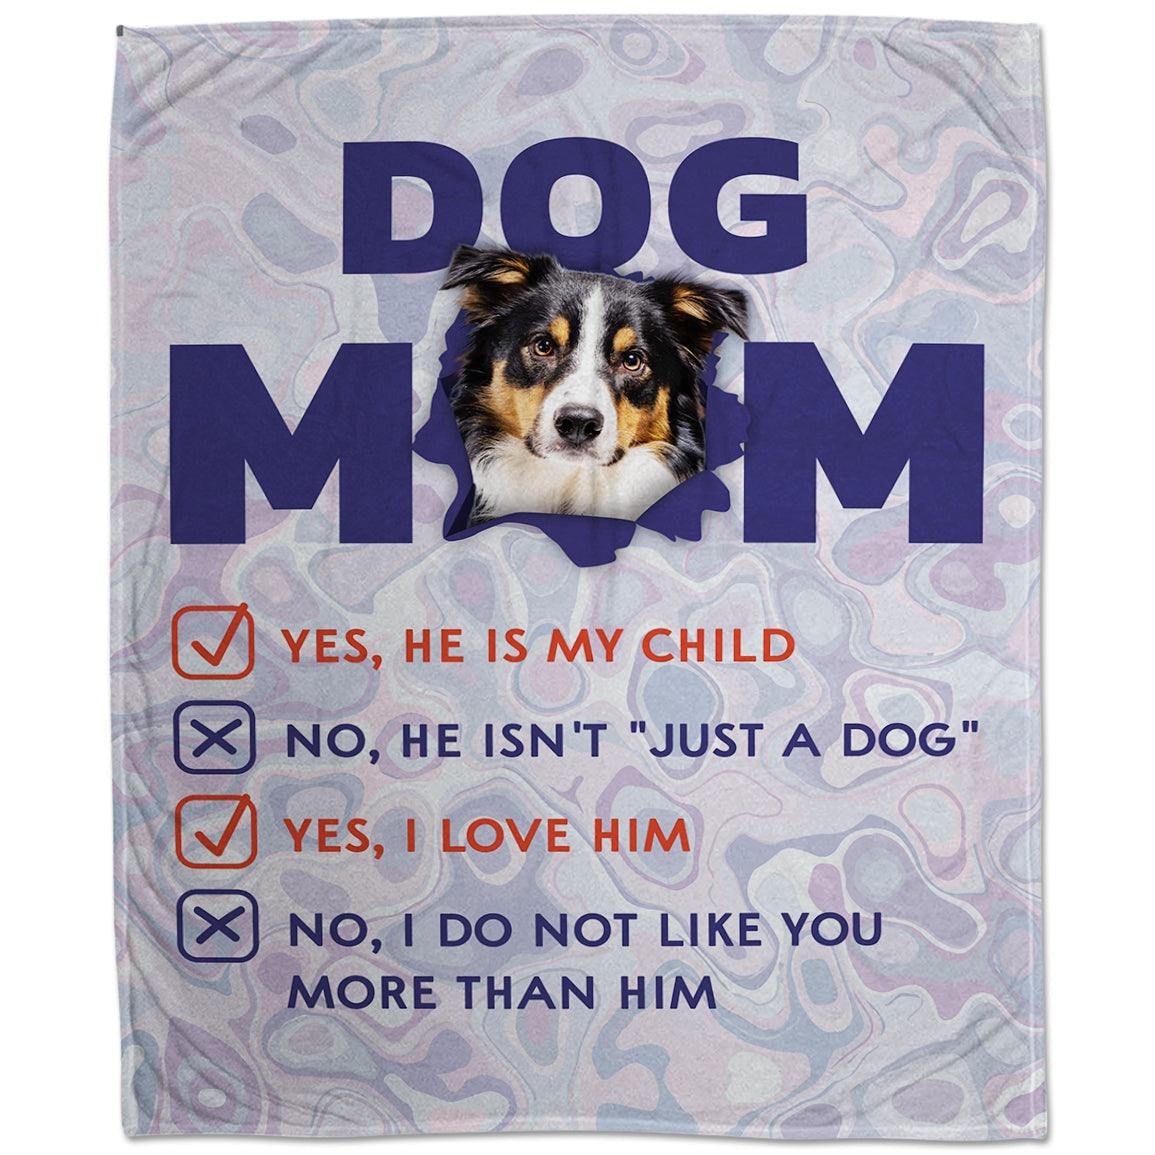 Customized Blanket With Pet Face - Dog Mom's Child Custom Pet Blanket - Gift For Pet Lovers, Puppy Lovers, Members Family - Amzanimalsgift